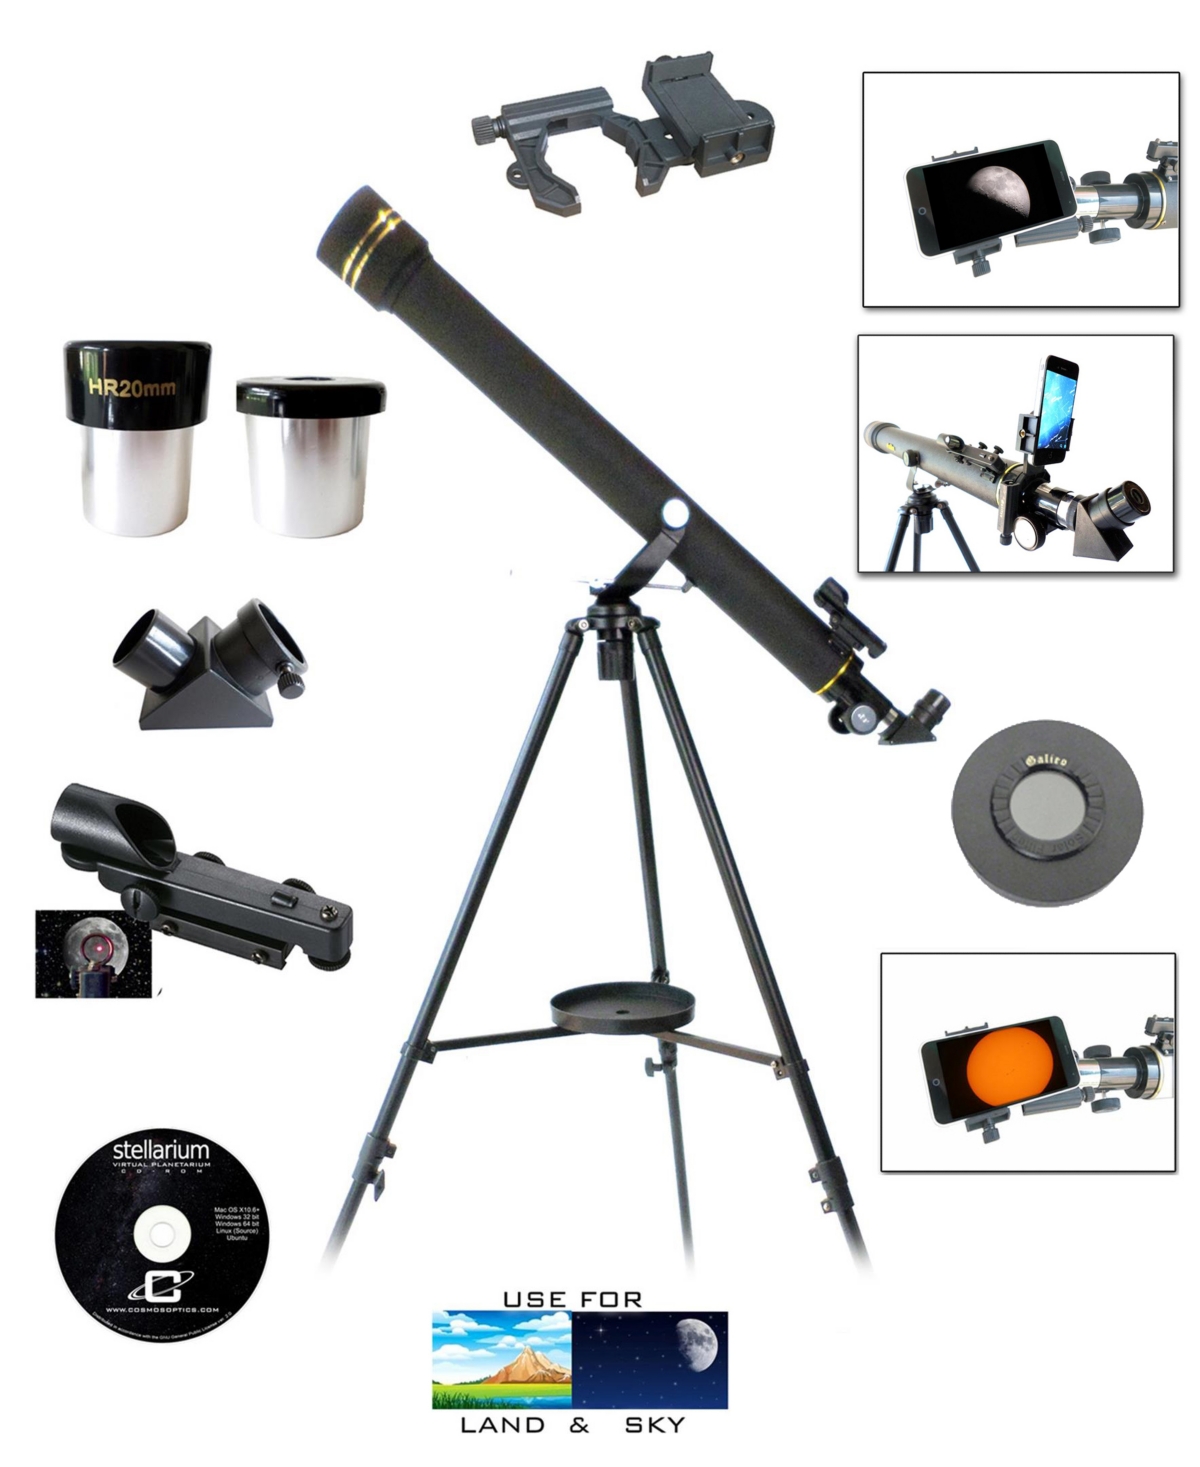 Galileo 700mm X 60mm Day And Night Telescope Kit Plus Smartphone Adapter And Solar Filter Cap In Black